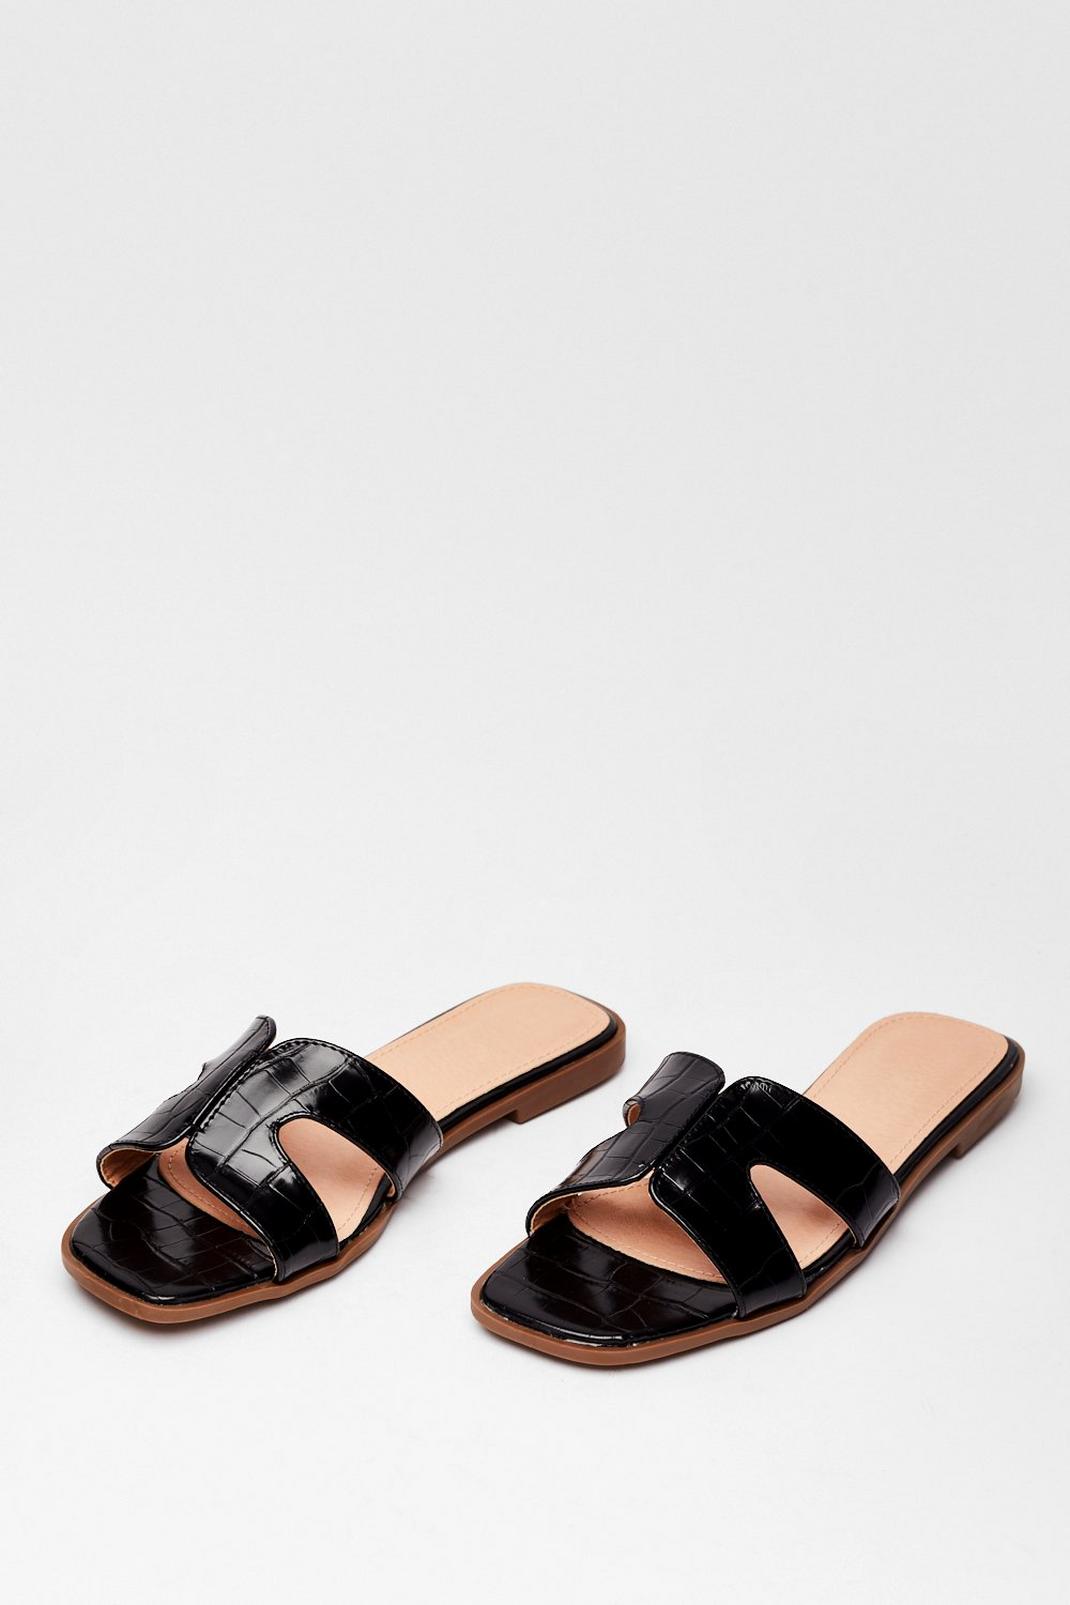 Croc What We Expected Faux Leather Flat Sandals | Nasty Gal